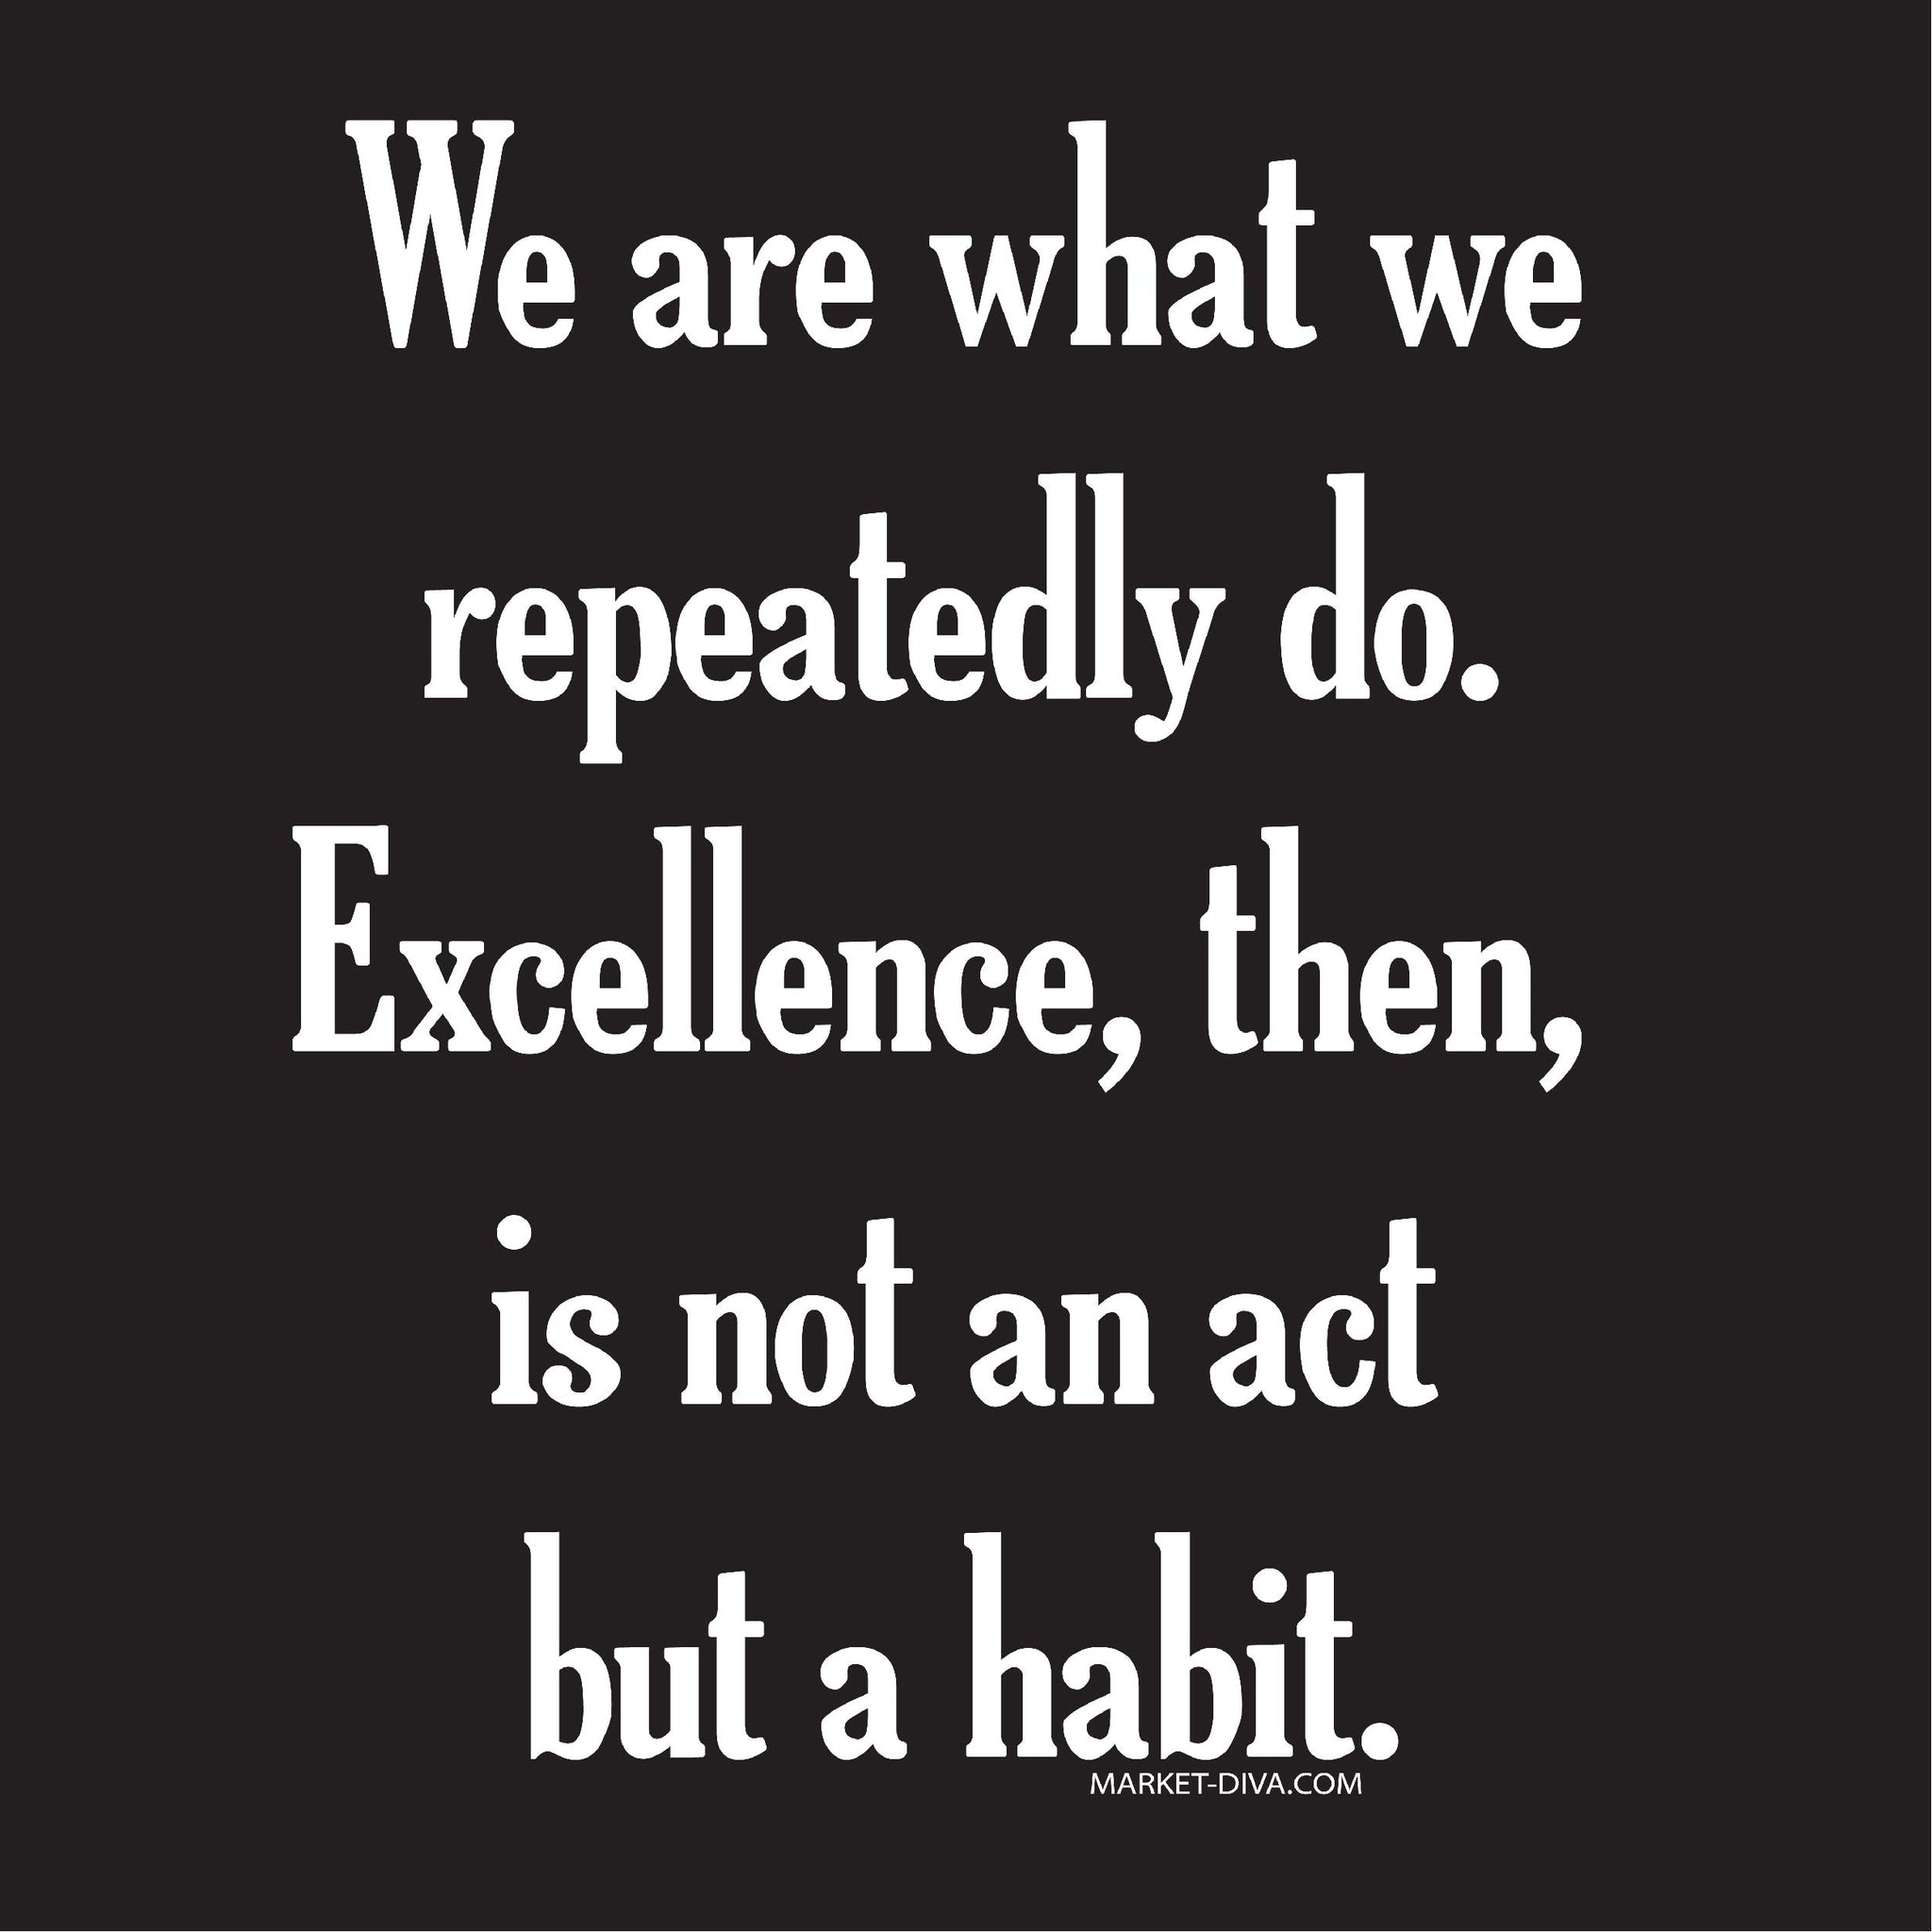 Excellence is a Habit